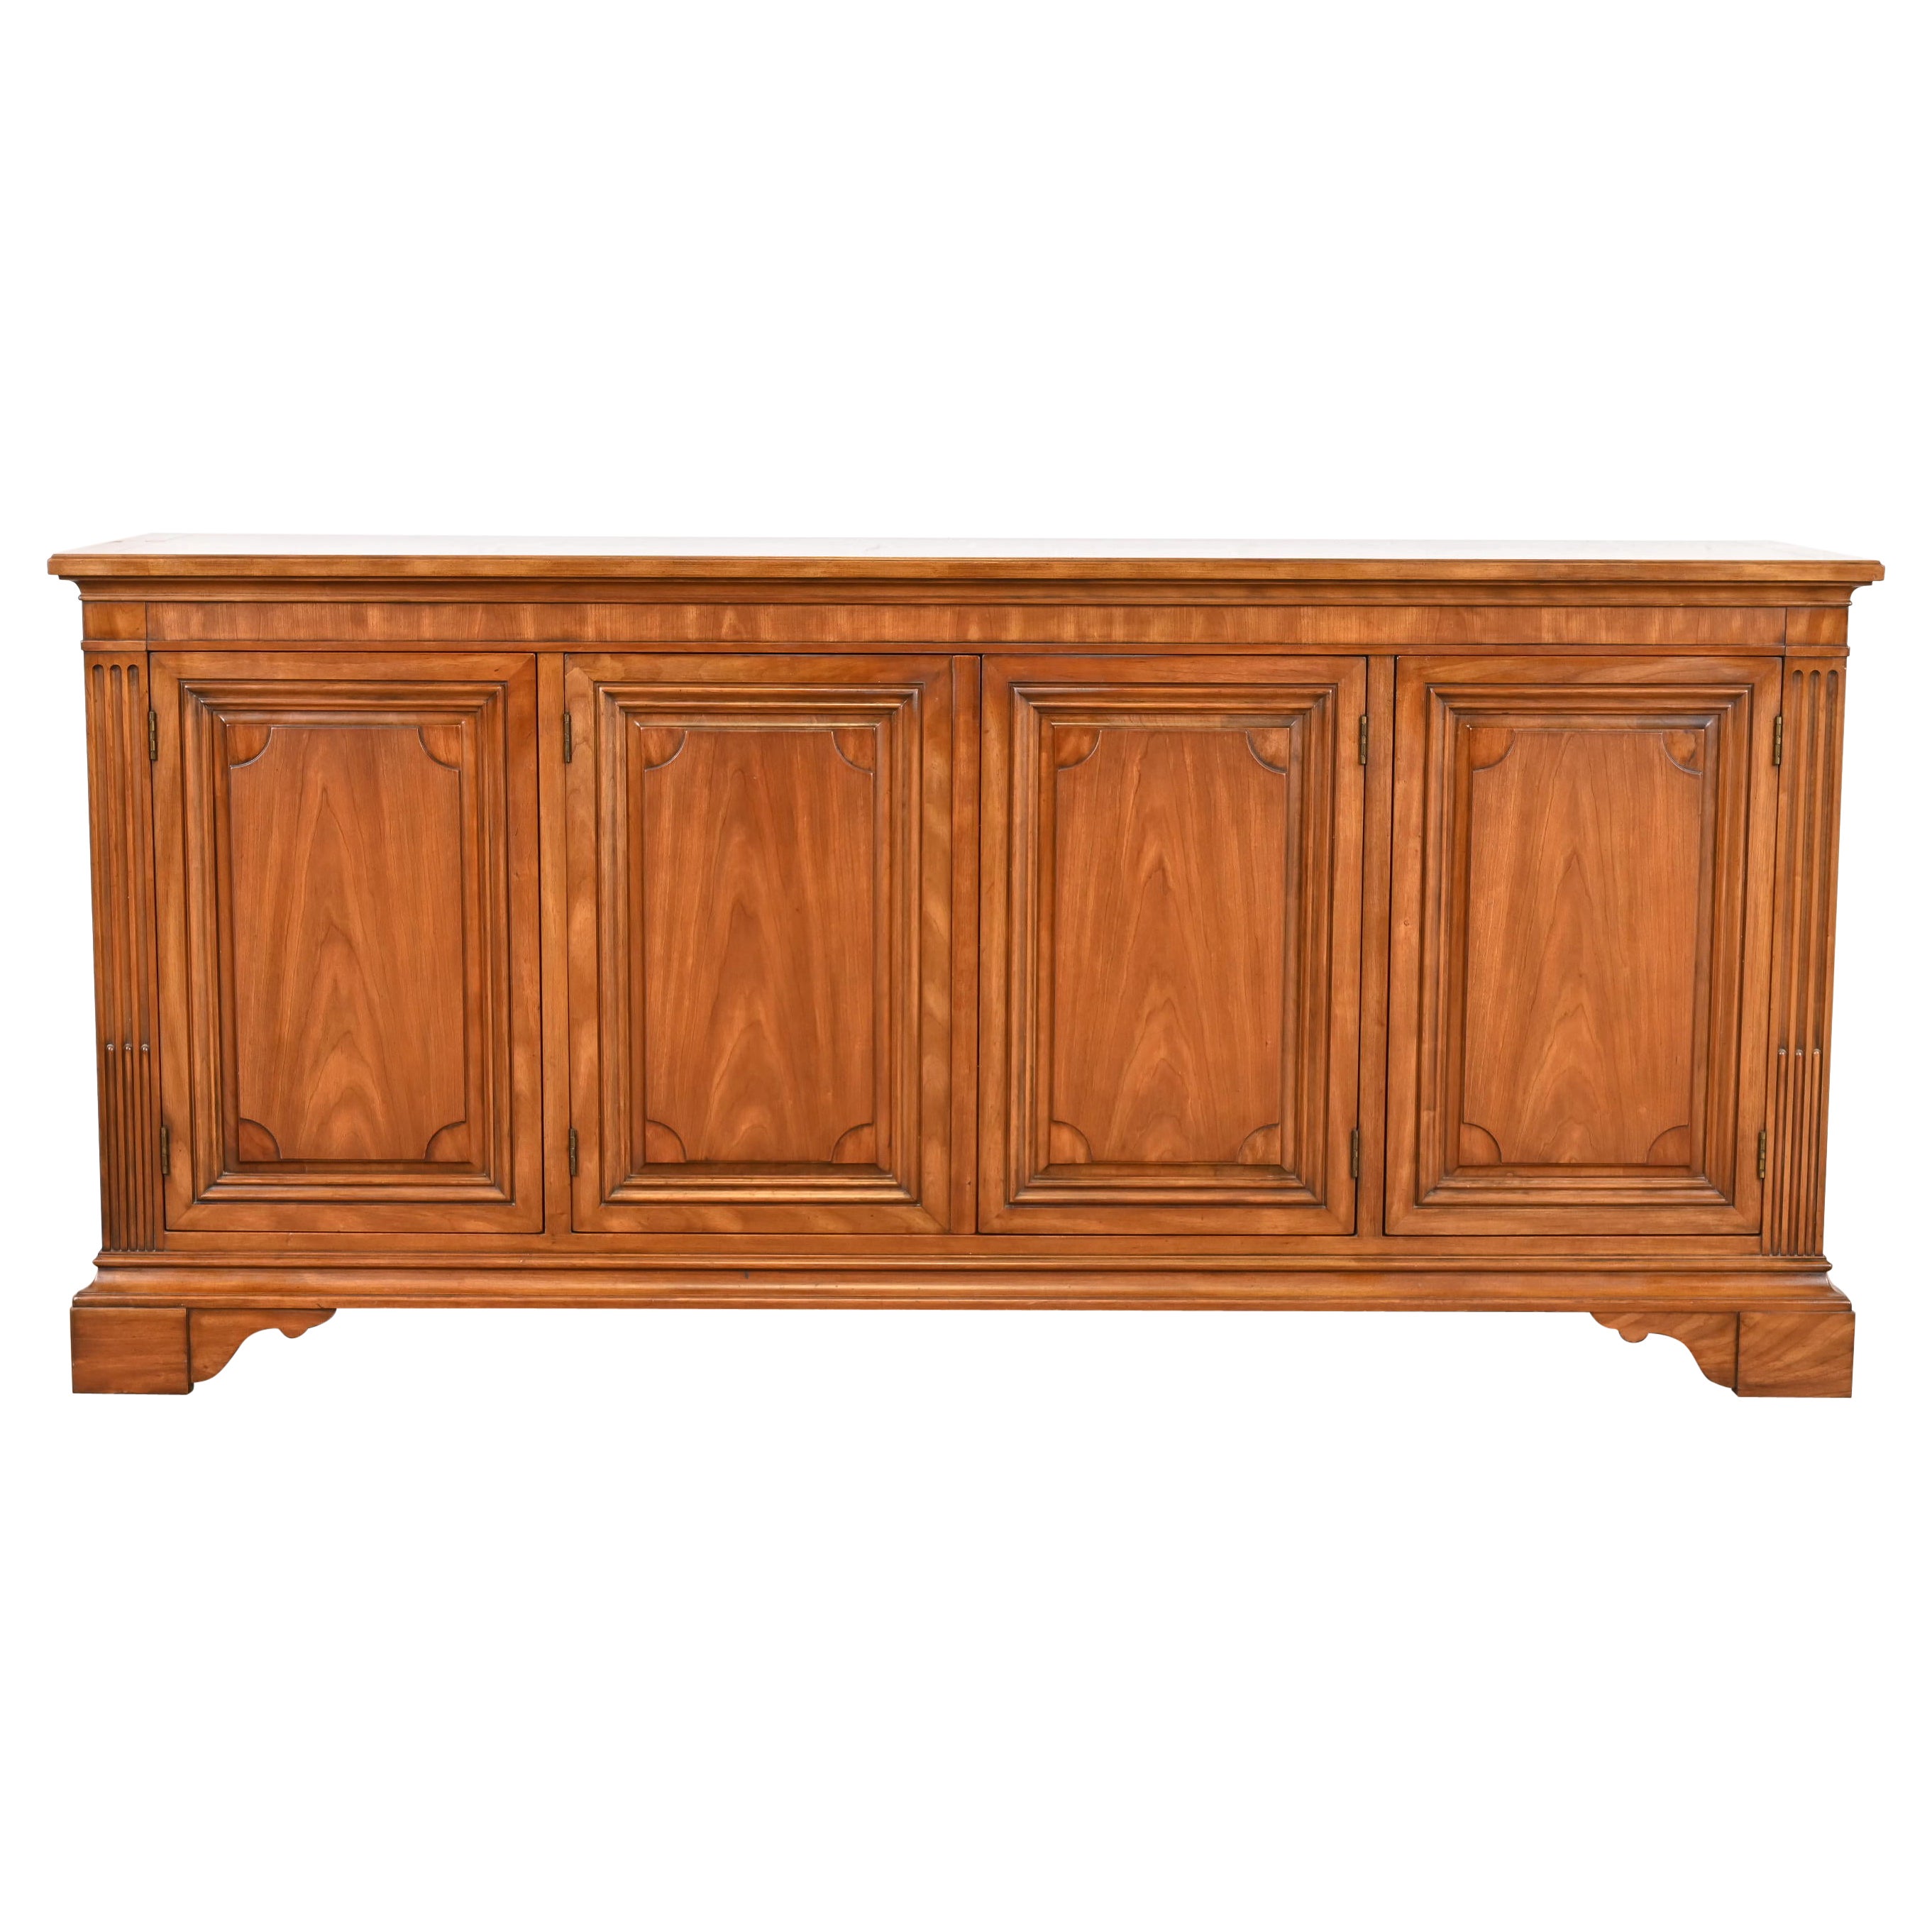 Kindel Furniture French Regency Louis Philippe Cherry Wood Sideboard, 1960s For Sale